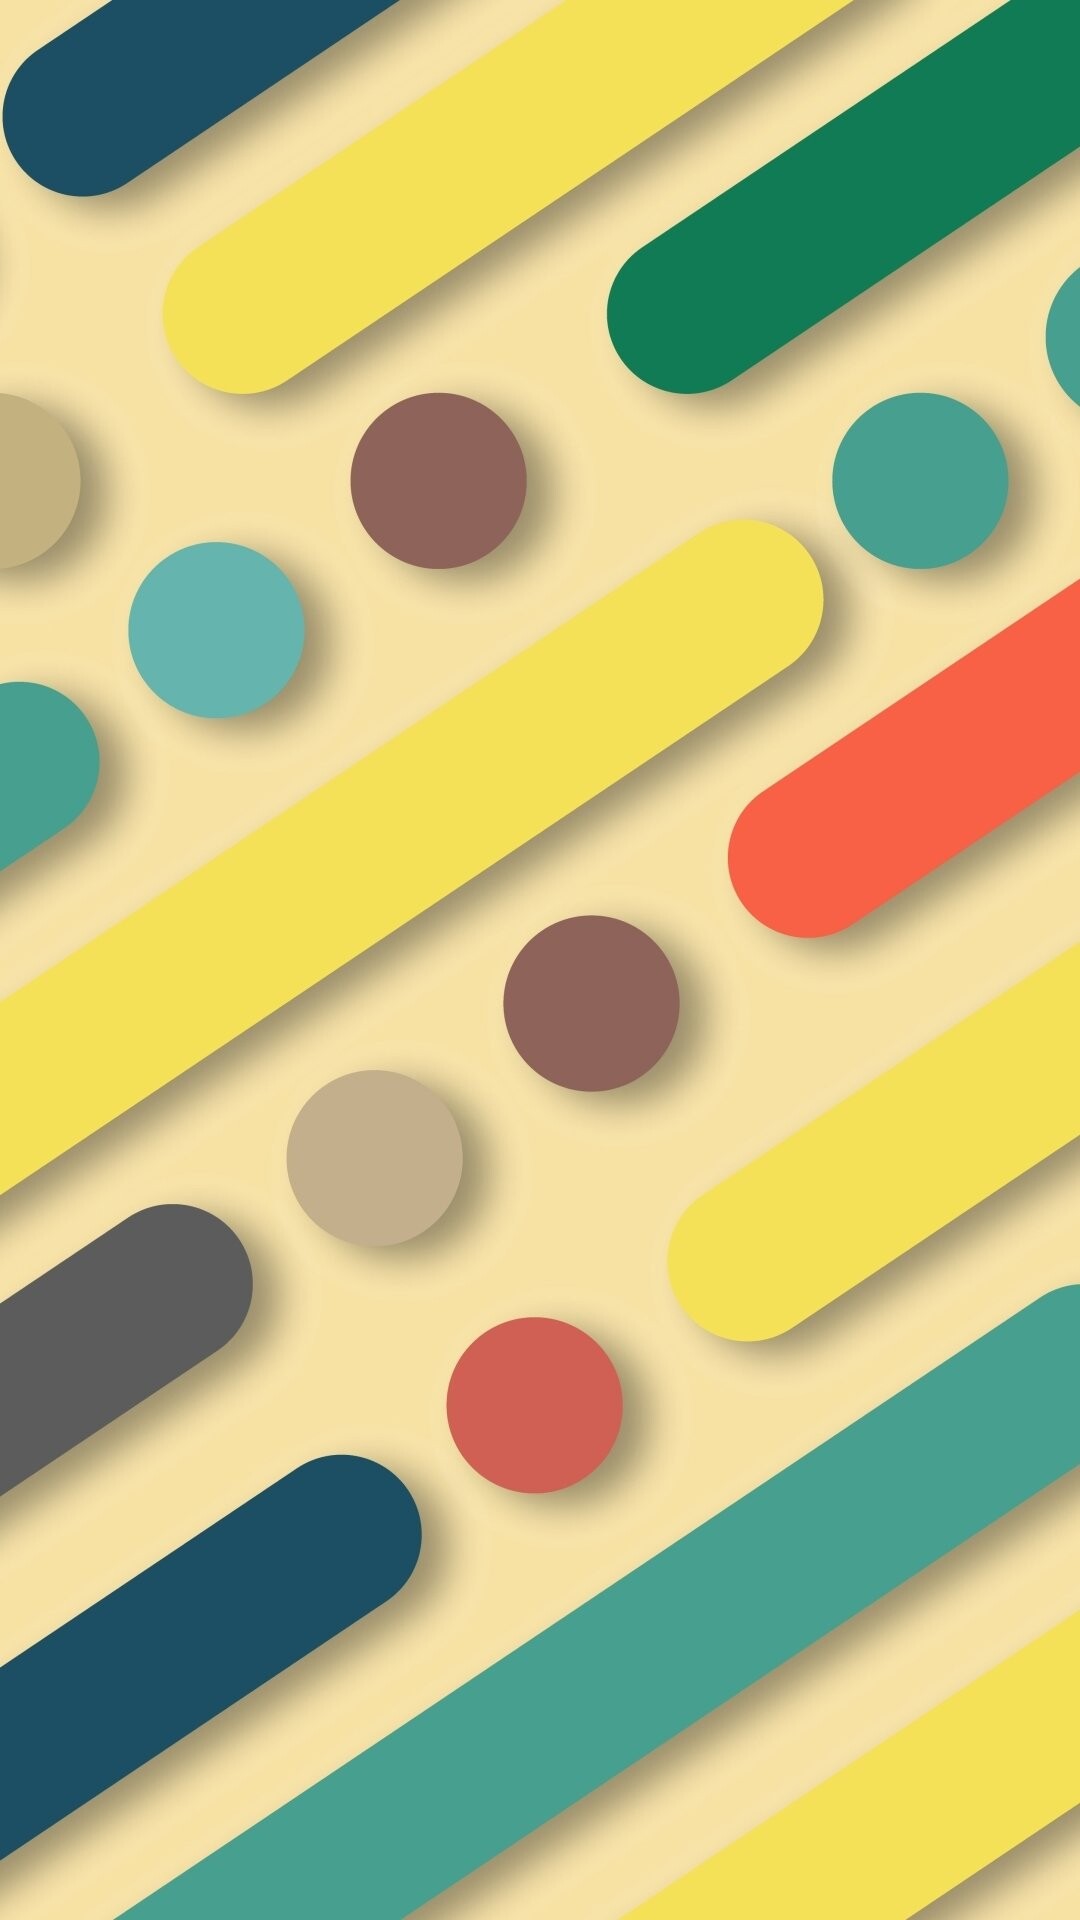 Geometry: Abstract, Multicolored stripes and circles, Parallels. 1080x1920 Full HD Background.